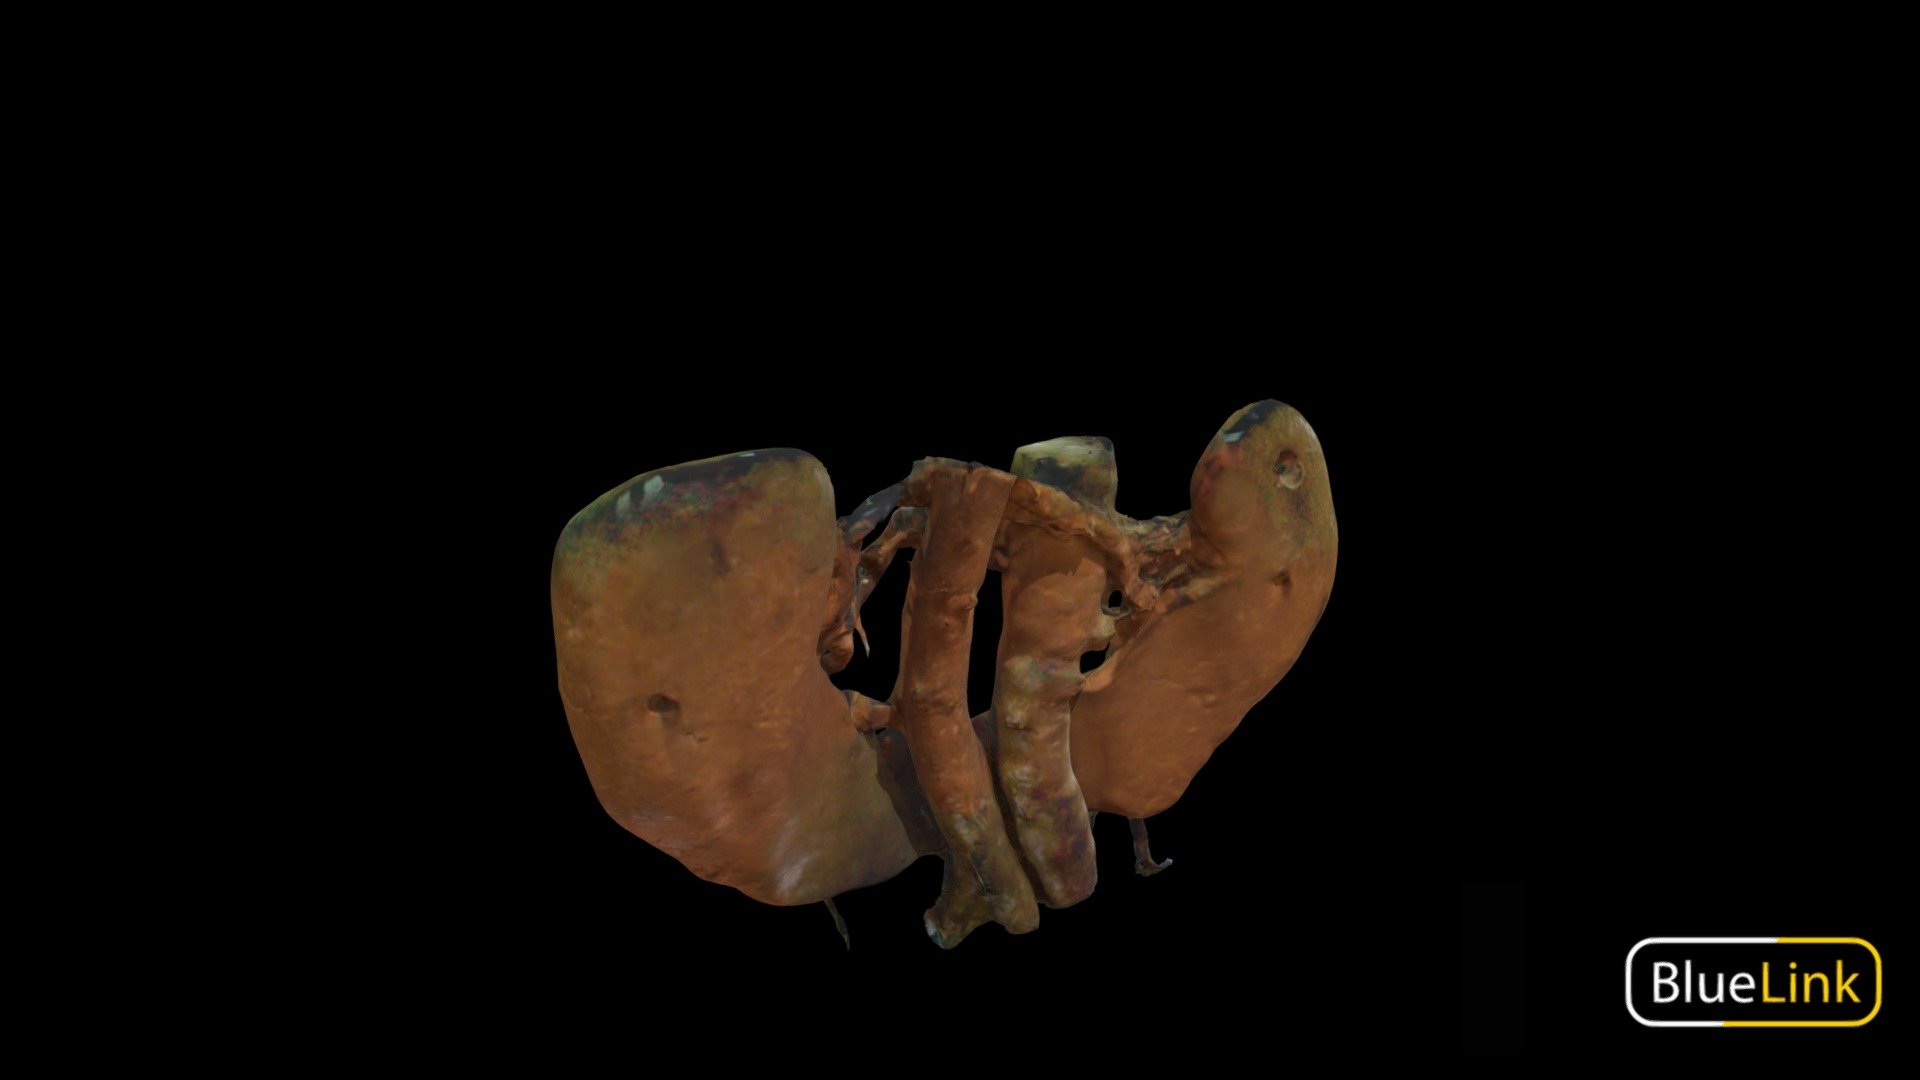 3D scan of a horseshoe kidney

Captured with Einscan Pro

Captured and edited by: Will Gribbin

Copyright2019 BK Alsup &amp; GM Fox

90339-A01 - Horseshoe Kidney - 3D model by Bluelink Anatomy - University of Michigan (@bluelinkanatomy) 3d model